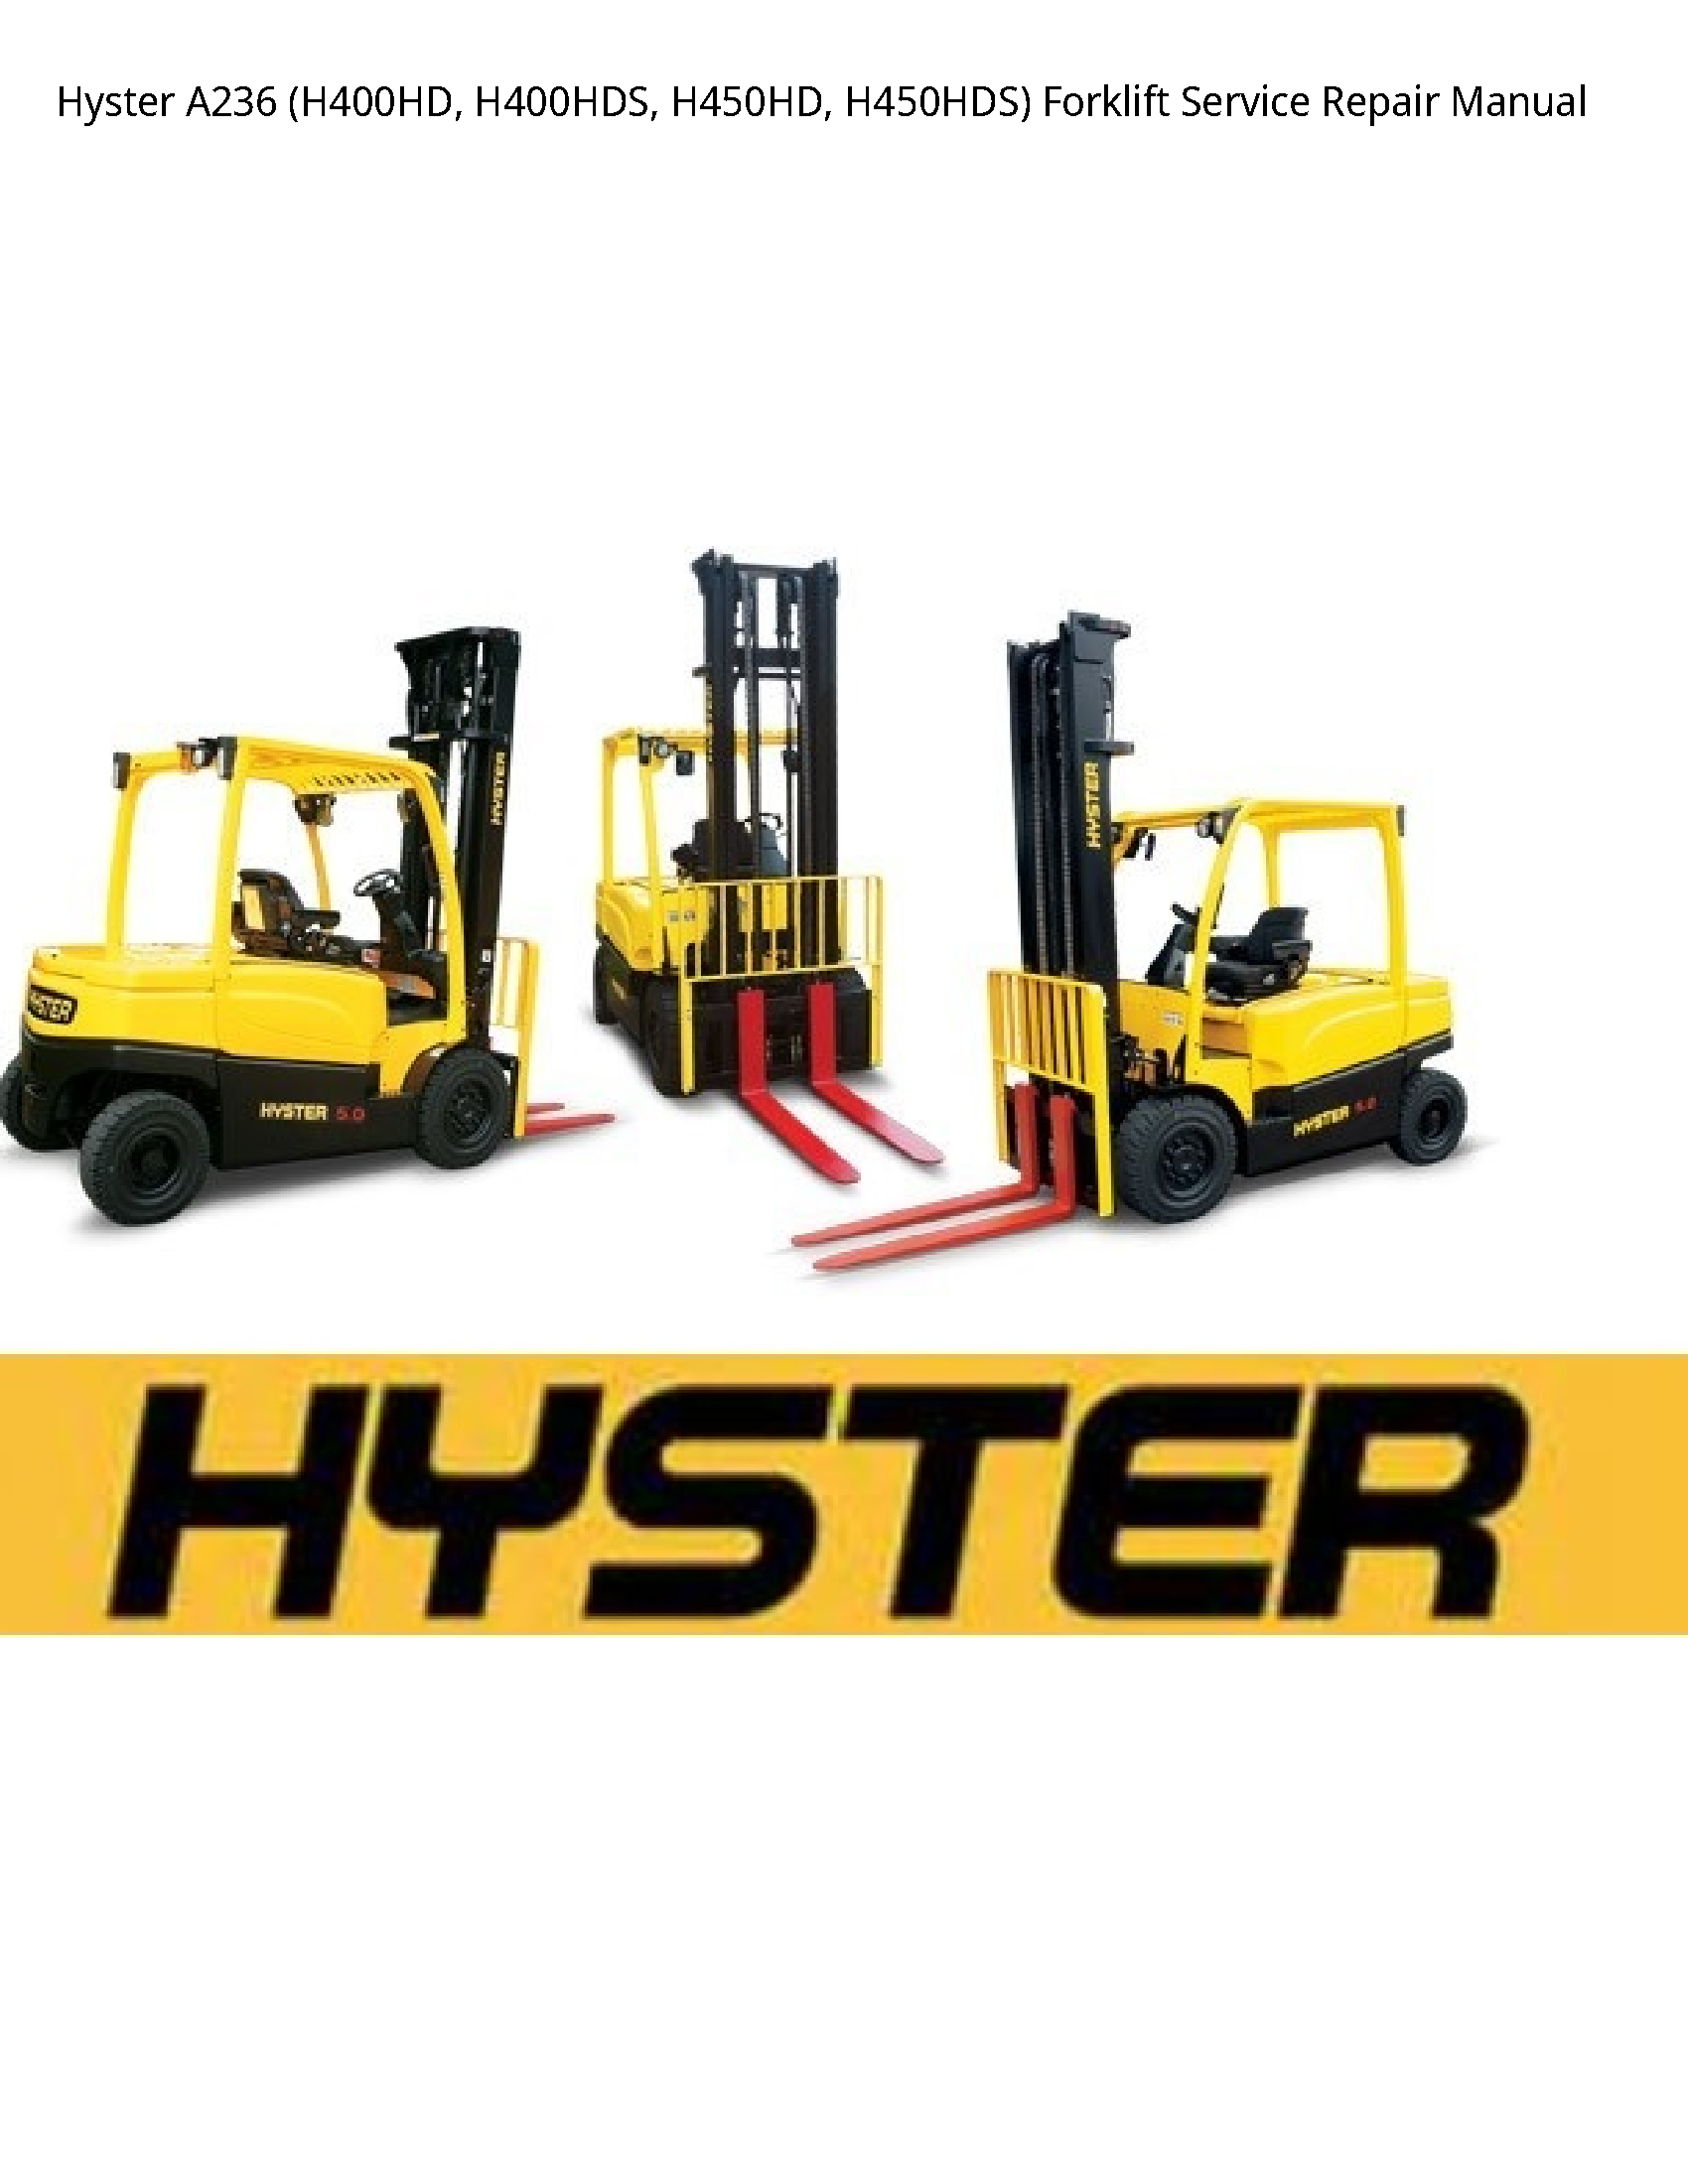 Hyster A236 Forklift manual